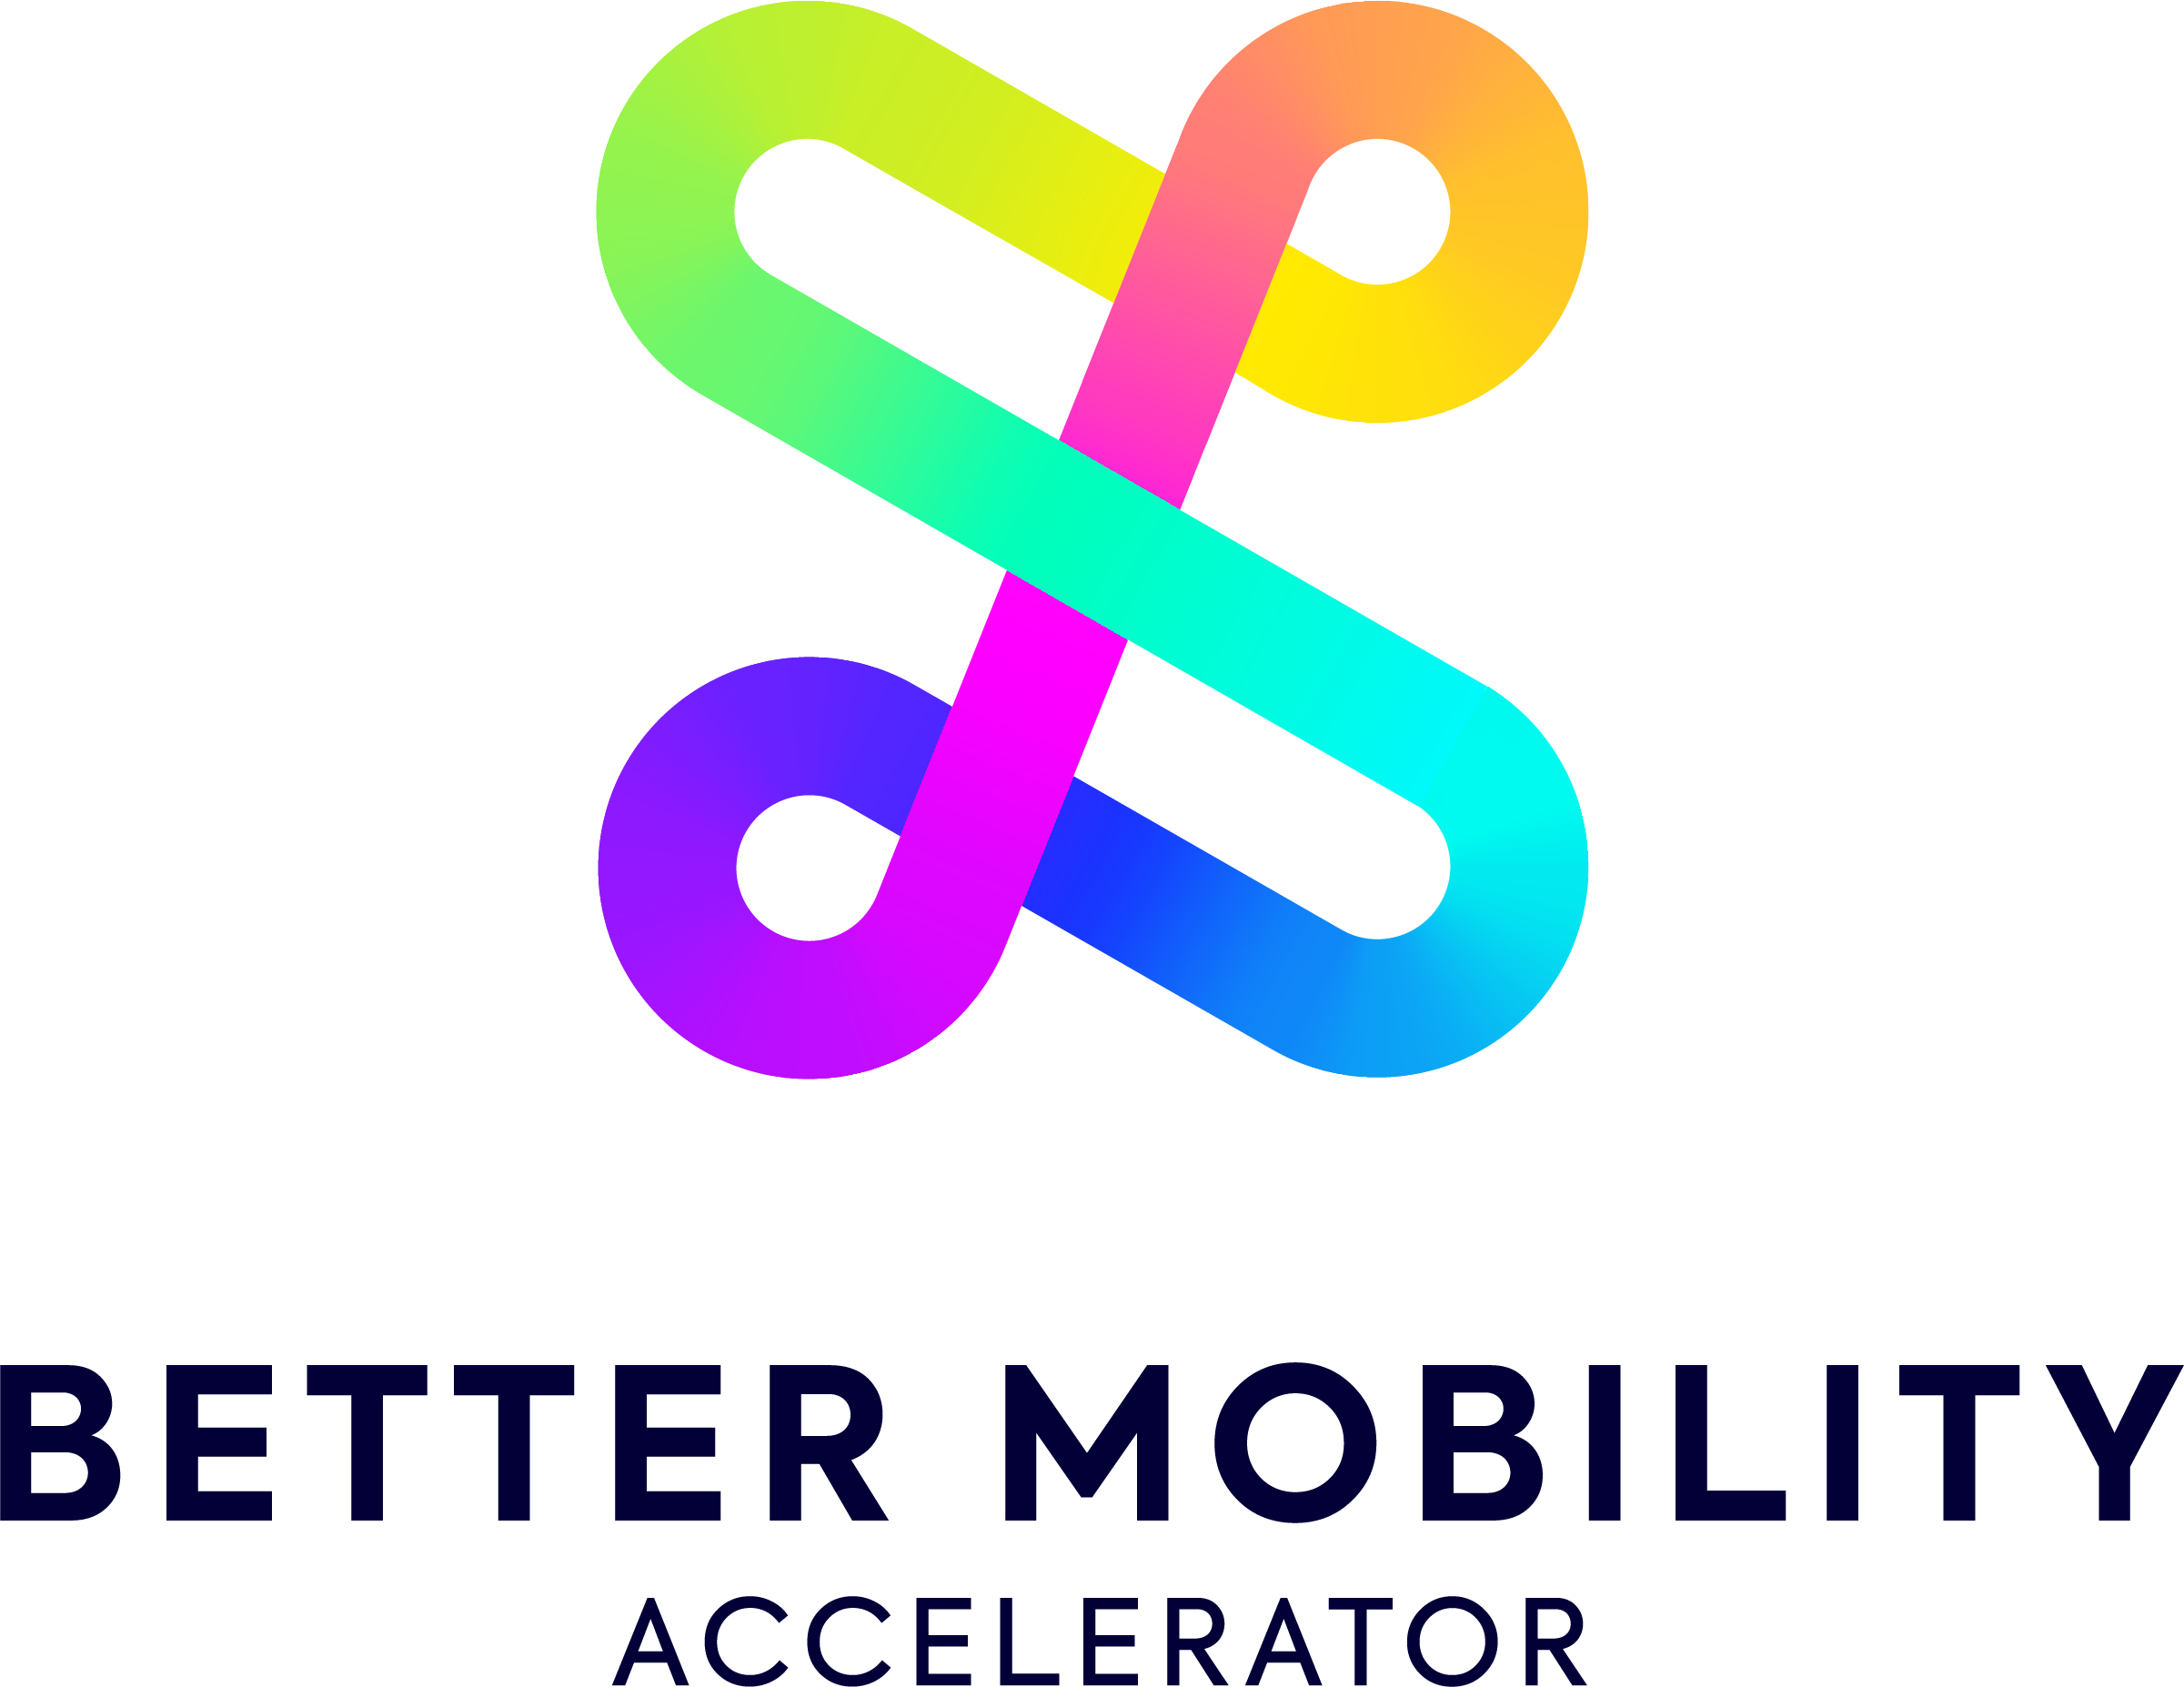 Colorful one-line logo of Better Mobility Accelerator, dark blue text